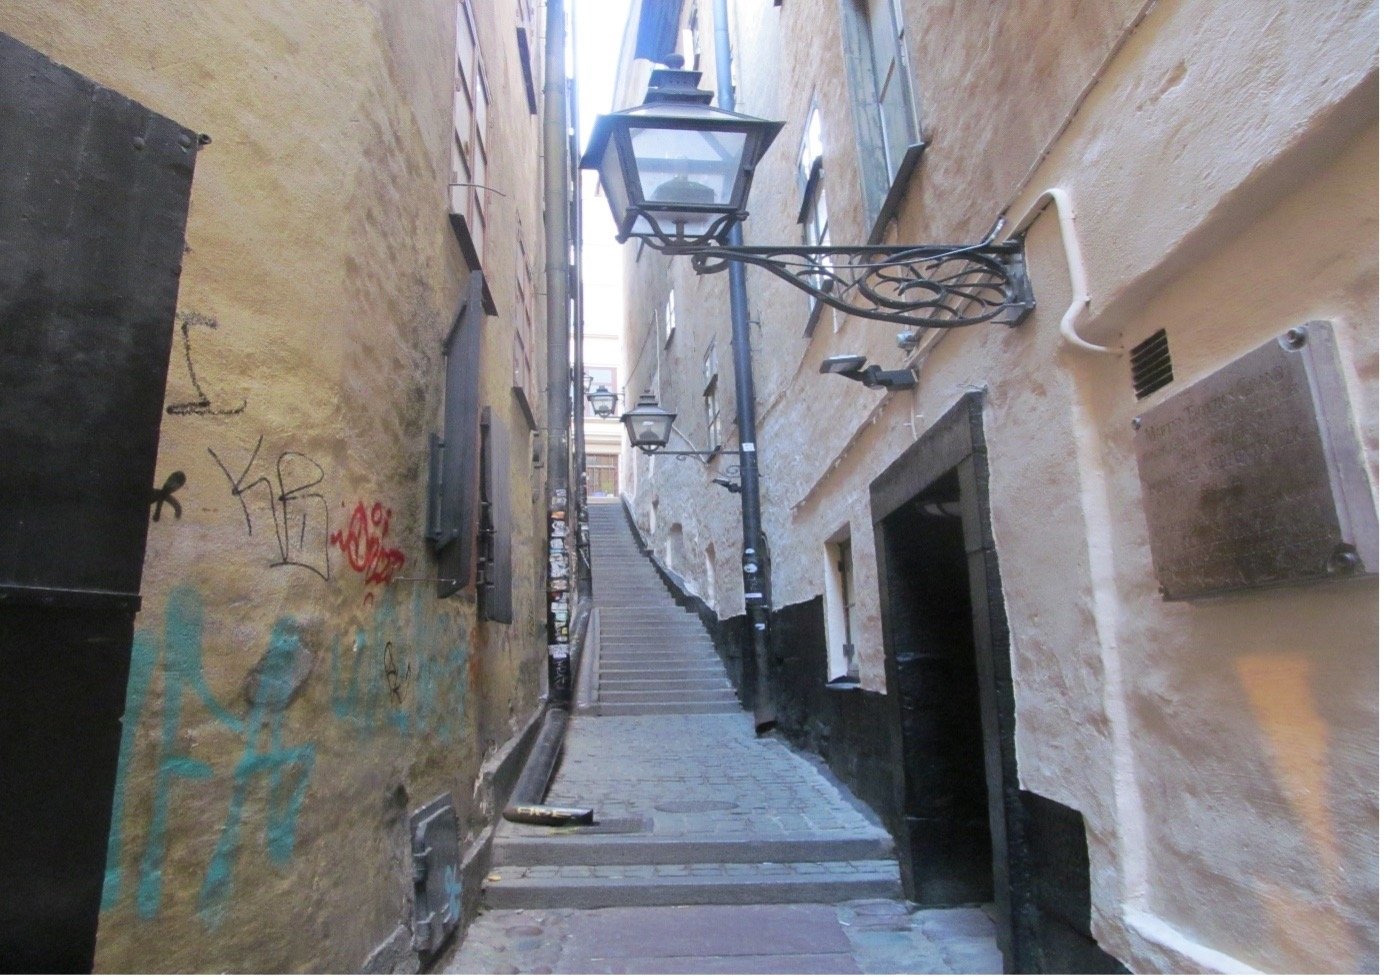 The Marten Trotzigs Grand is Stockholm's narrowest street. (Photo courtesy of Karin)